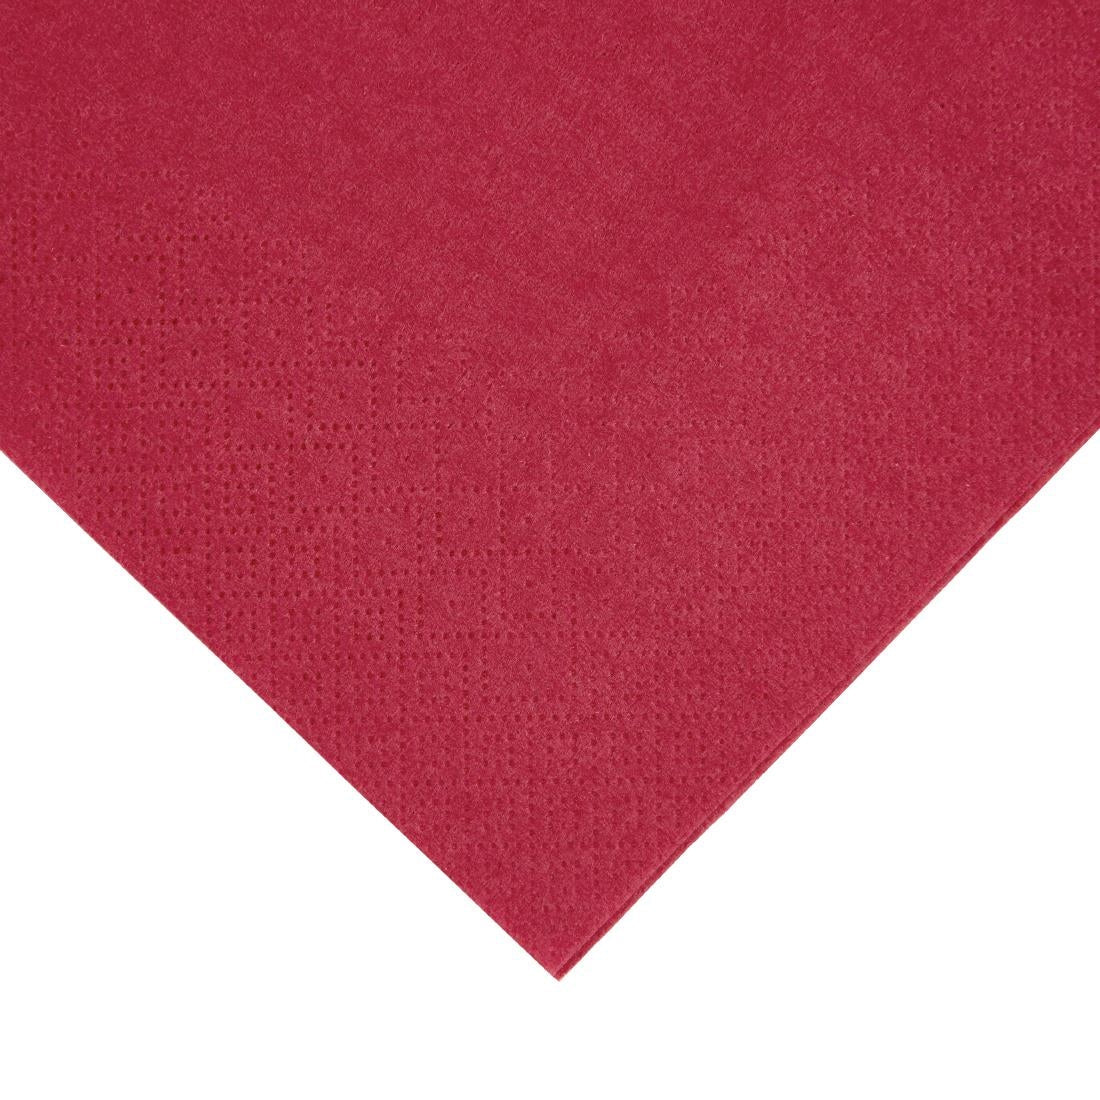 FE221 Fiesta Recyclable Lunch Napkin Bordeaux 33x33cm 2ply 1/4 Fold (Pack of 2000) JD Catering Equipment Solutions Ltd